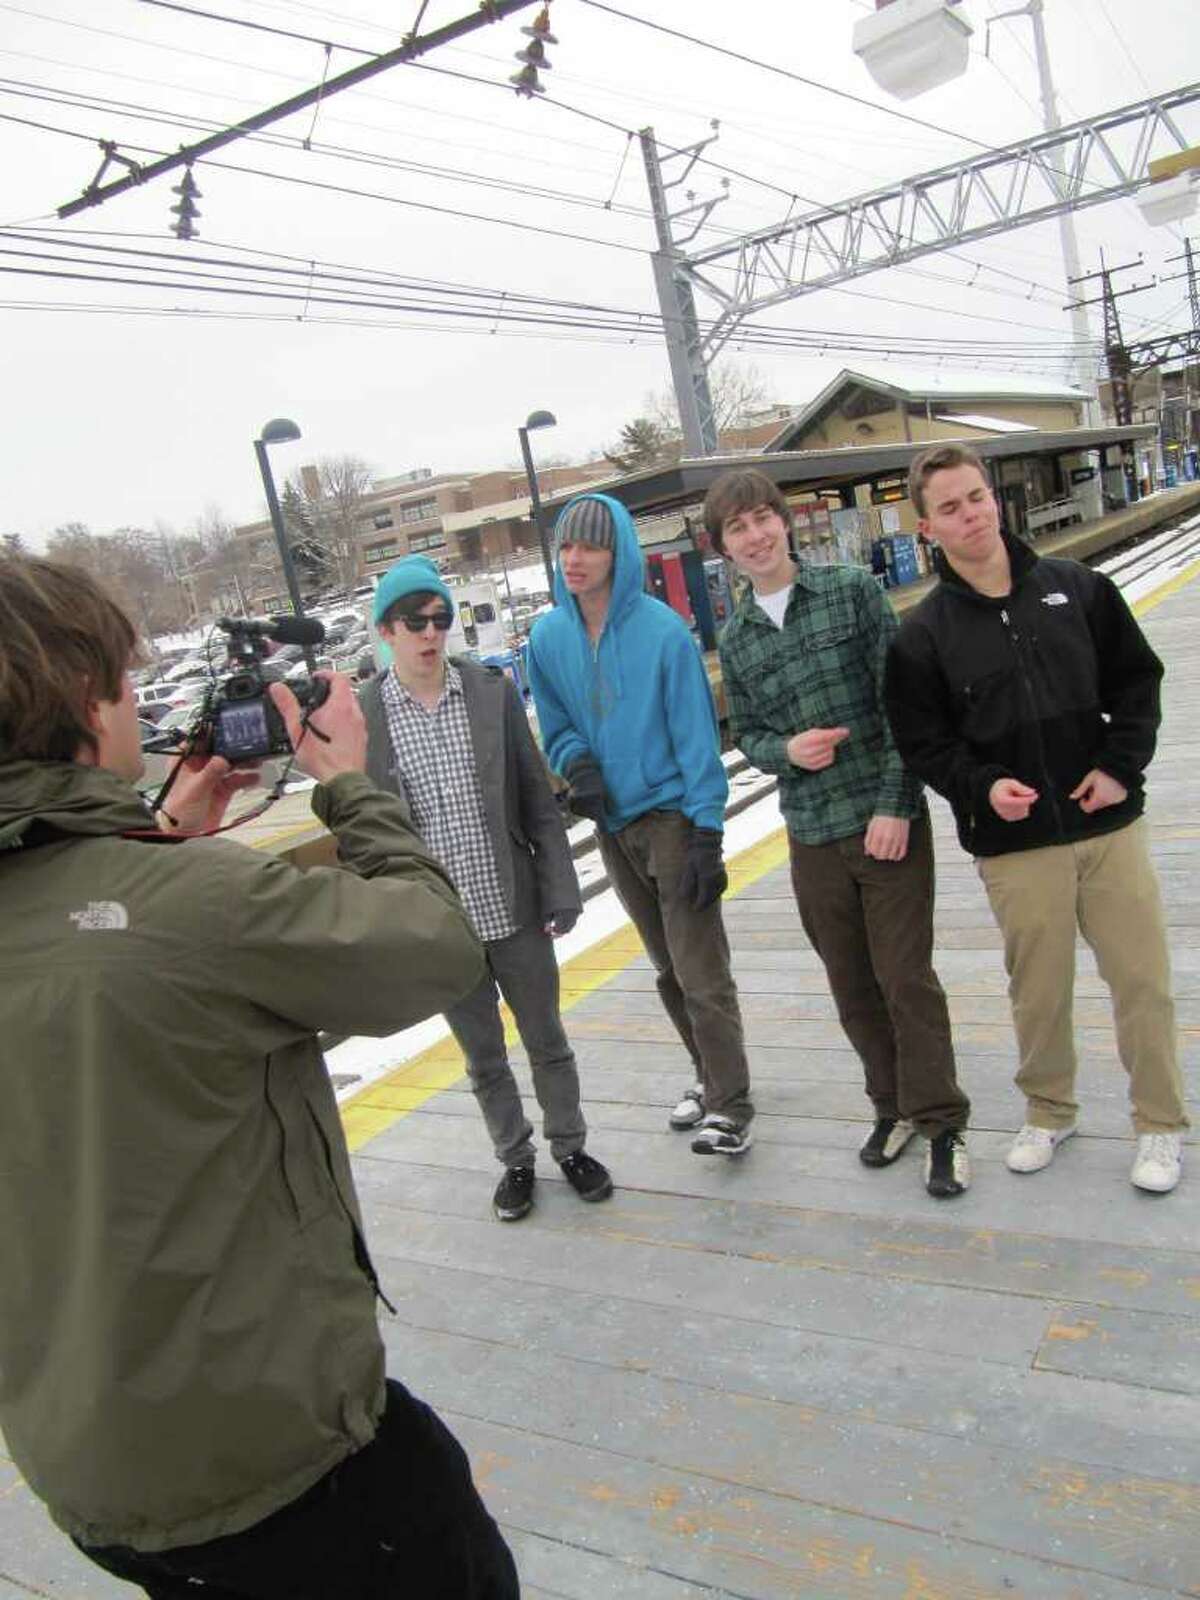 The FWHS Acafellas, an a cappella group made up of Fairfield Warde High School teens, shoot a video along the train track in downtown Fairfield Monday afternoon. The group members, from left to right, are Johnny Shea, Sam Warnick, Zach Parfitt and Tim Veit.